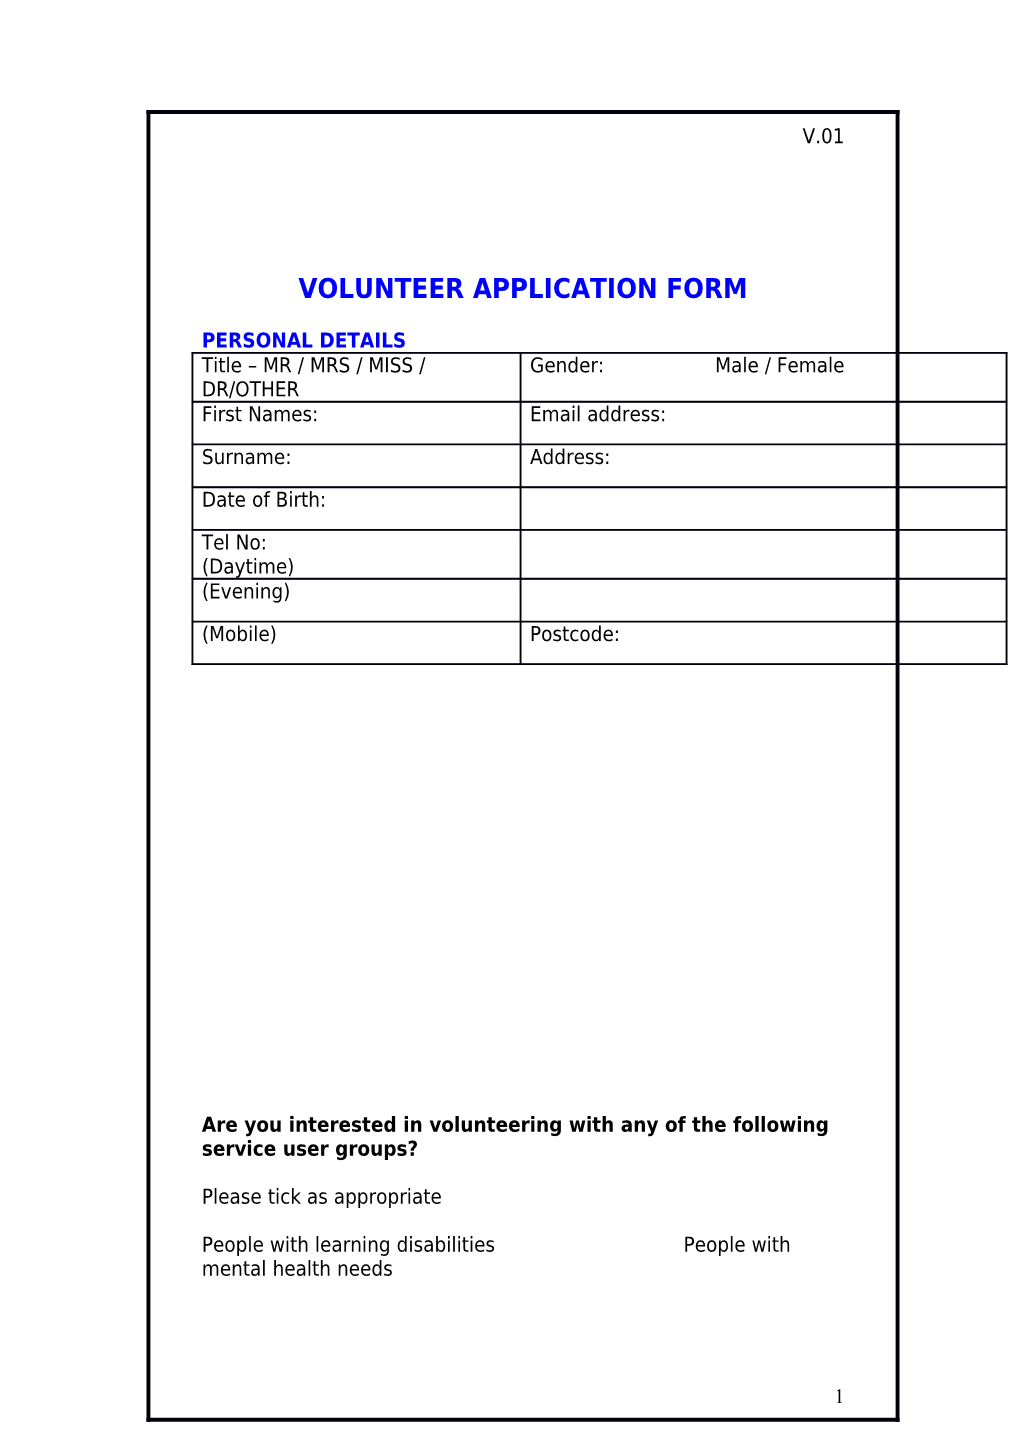 Are You Interested in Volunteering with Any of the Following Service User Groups?